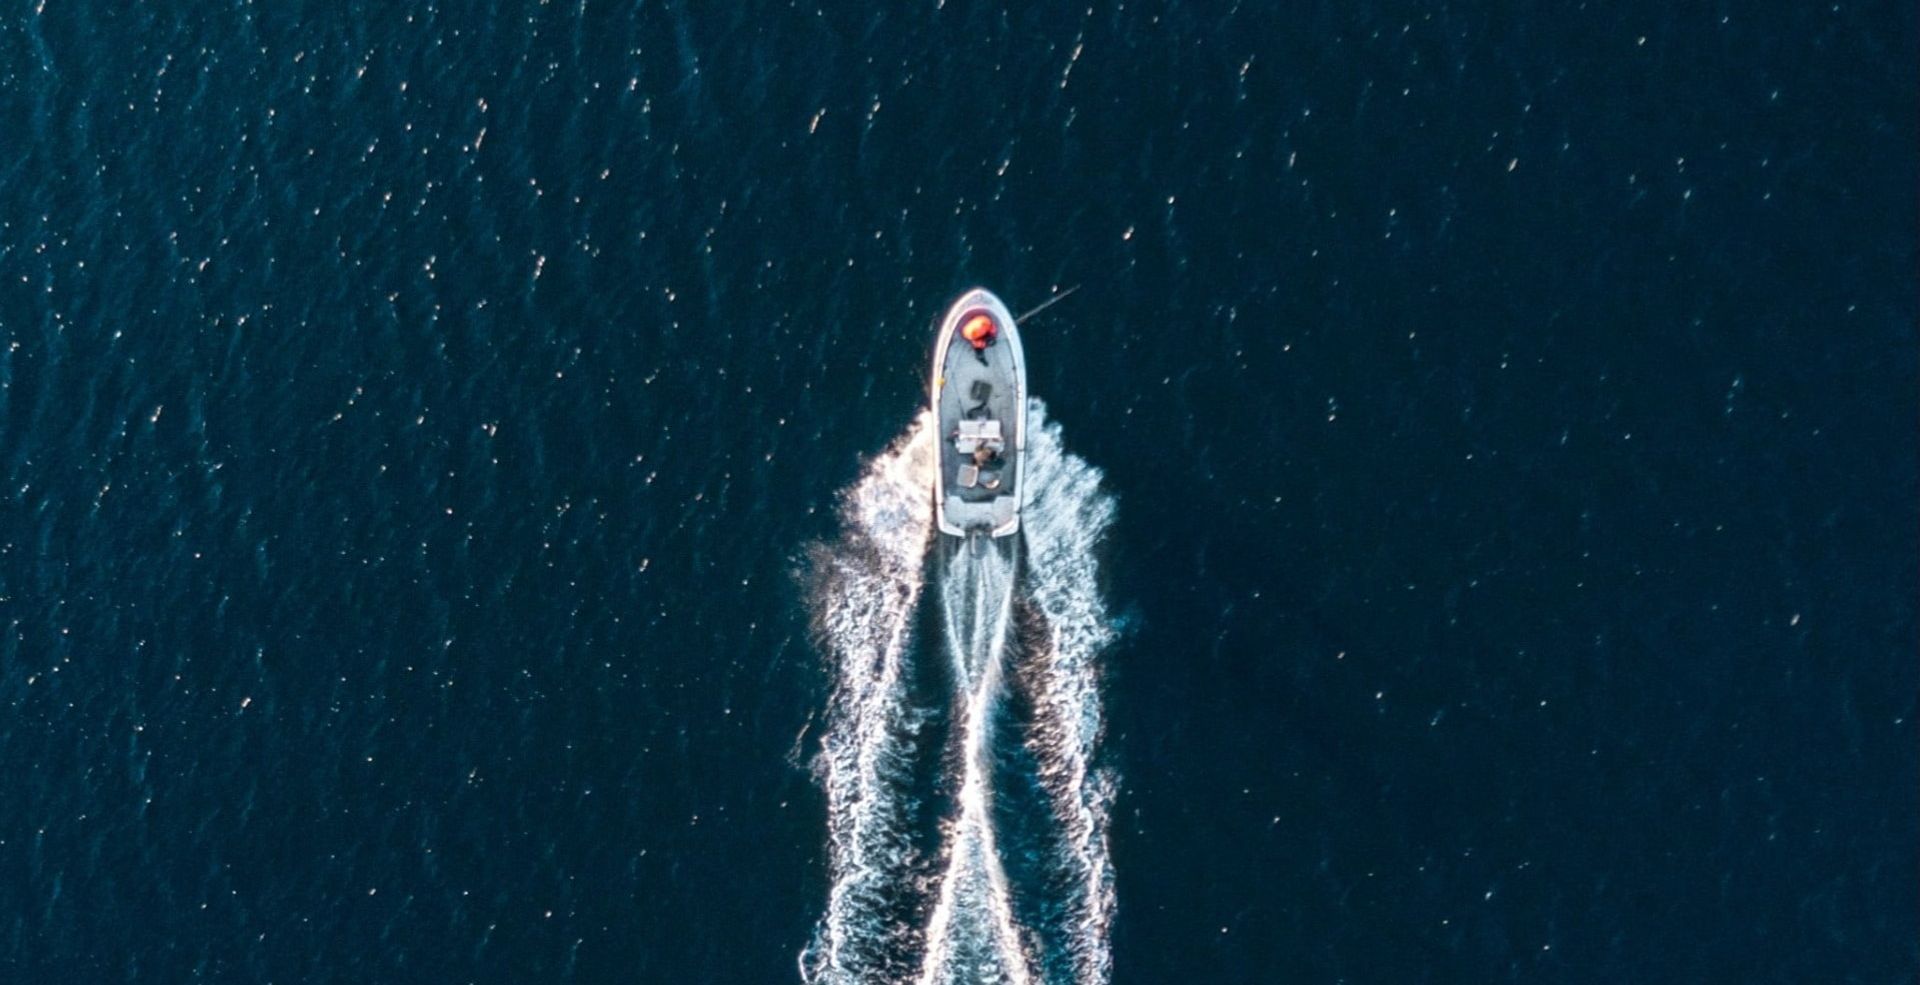 bird's view of a boat in the ocean